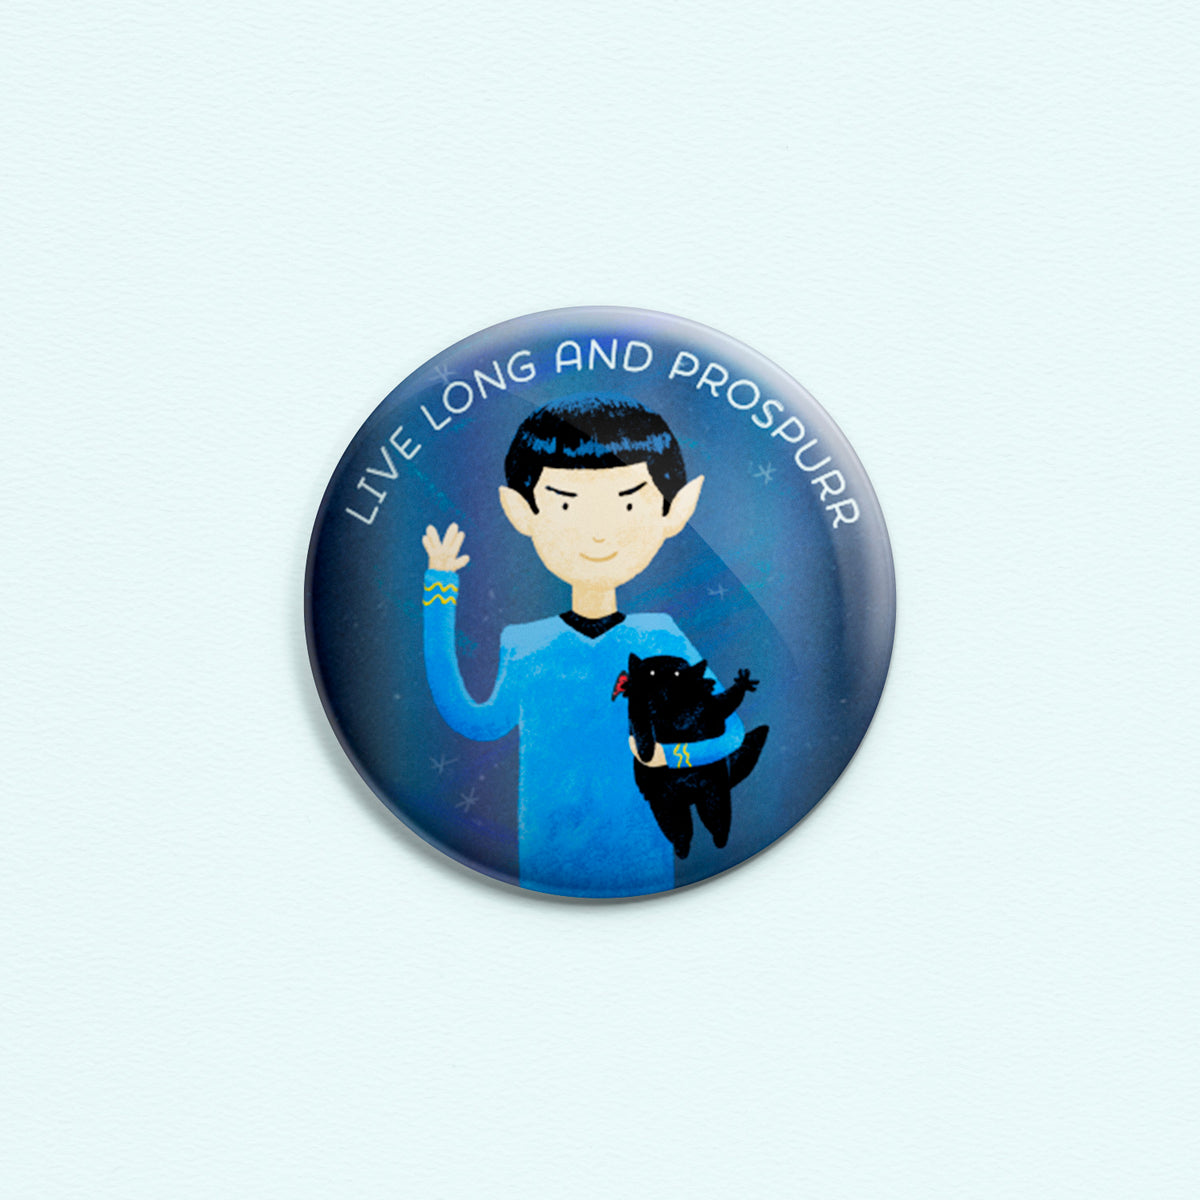 Live Long And Prospurr - Button or magnet with a digital painting of Spock holding a black cat. Both are making the Vulcan salute. LLAP.